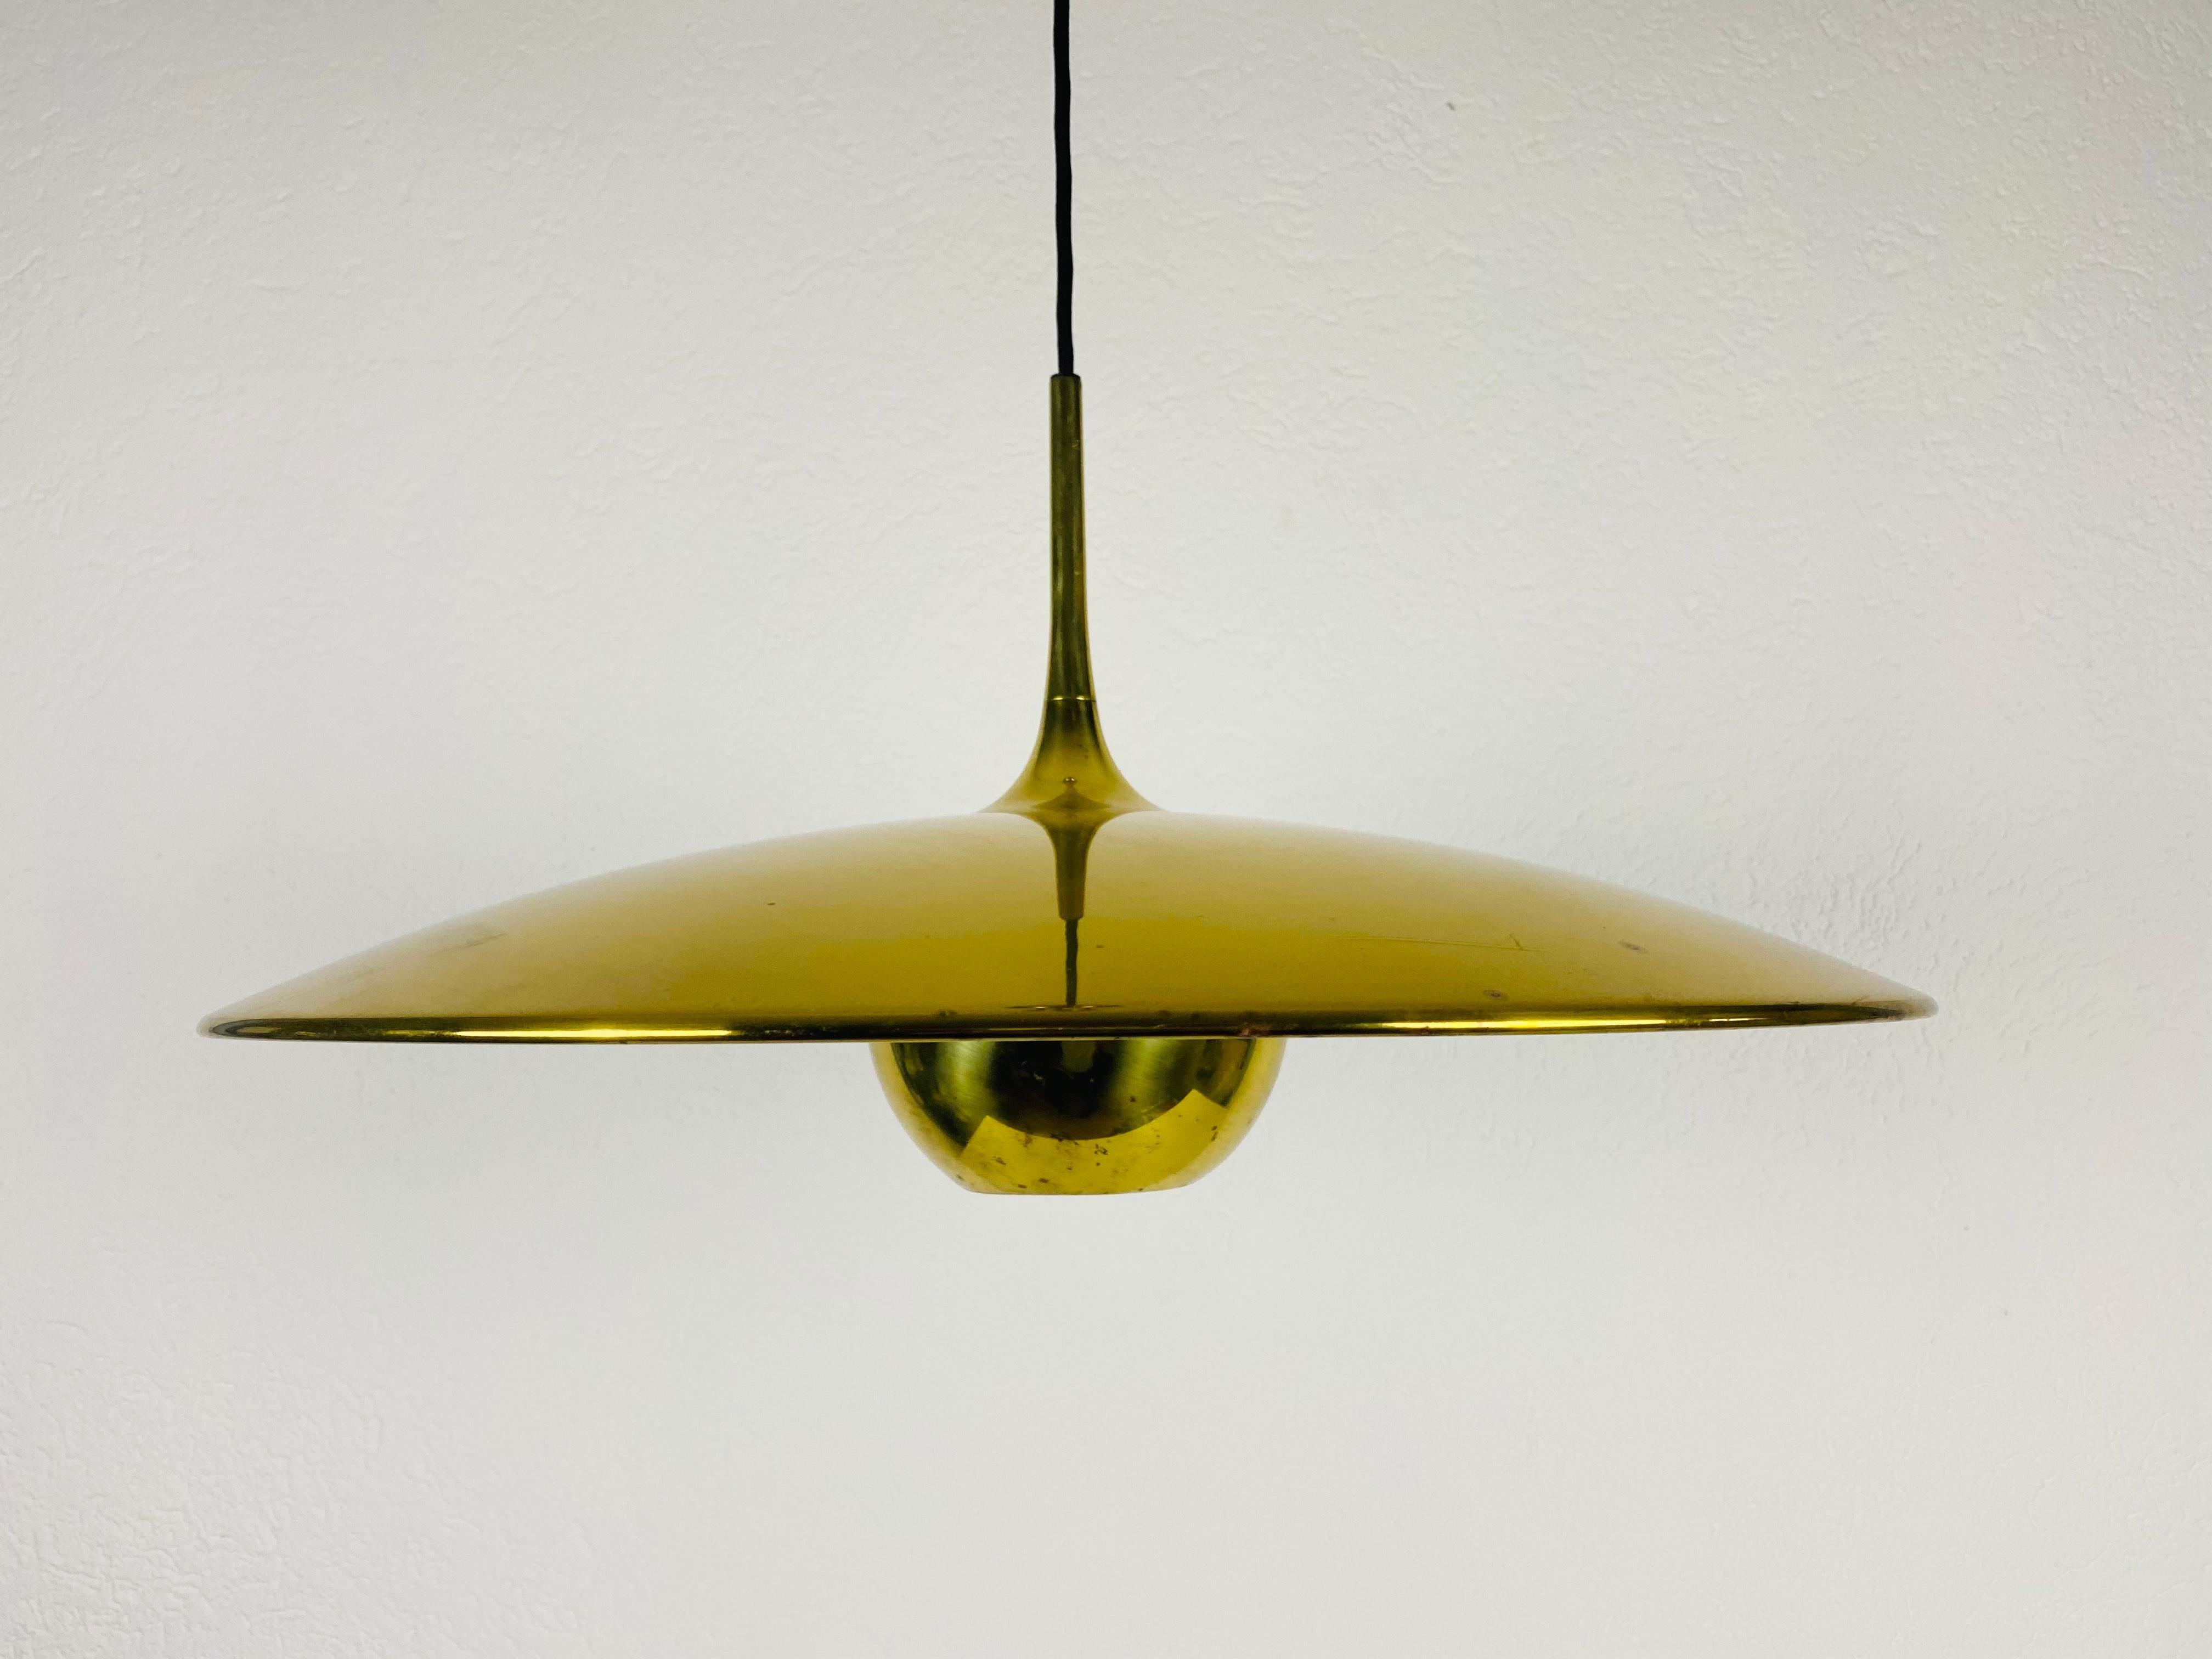 Counter balance pendant designed by Florian Schulz and made in Germany in the 1970s. It is fascinating with its exclusive design. The height of the lighting is adjustable.

Measurements of shade:
Height 60 - 115 cm
Diameter 55 cm

The light